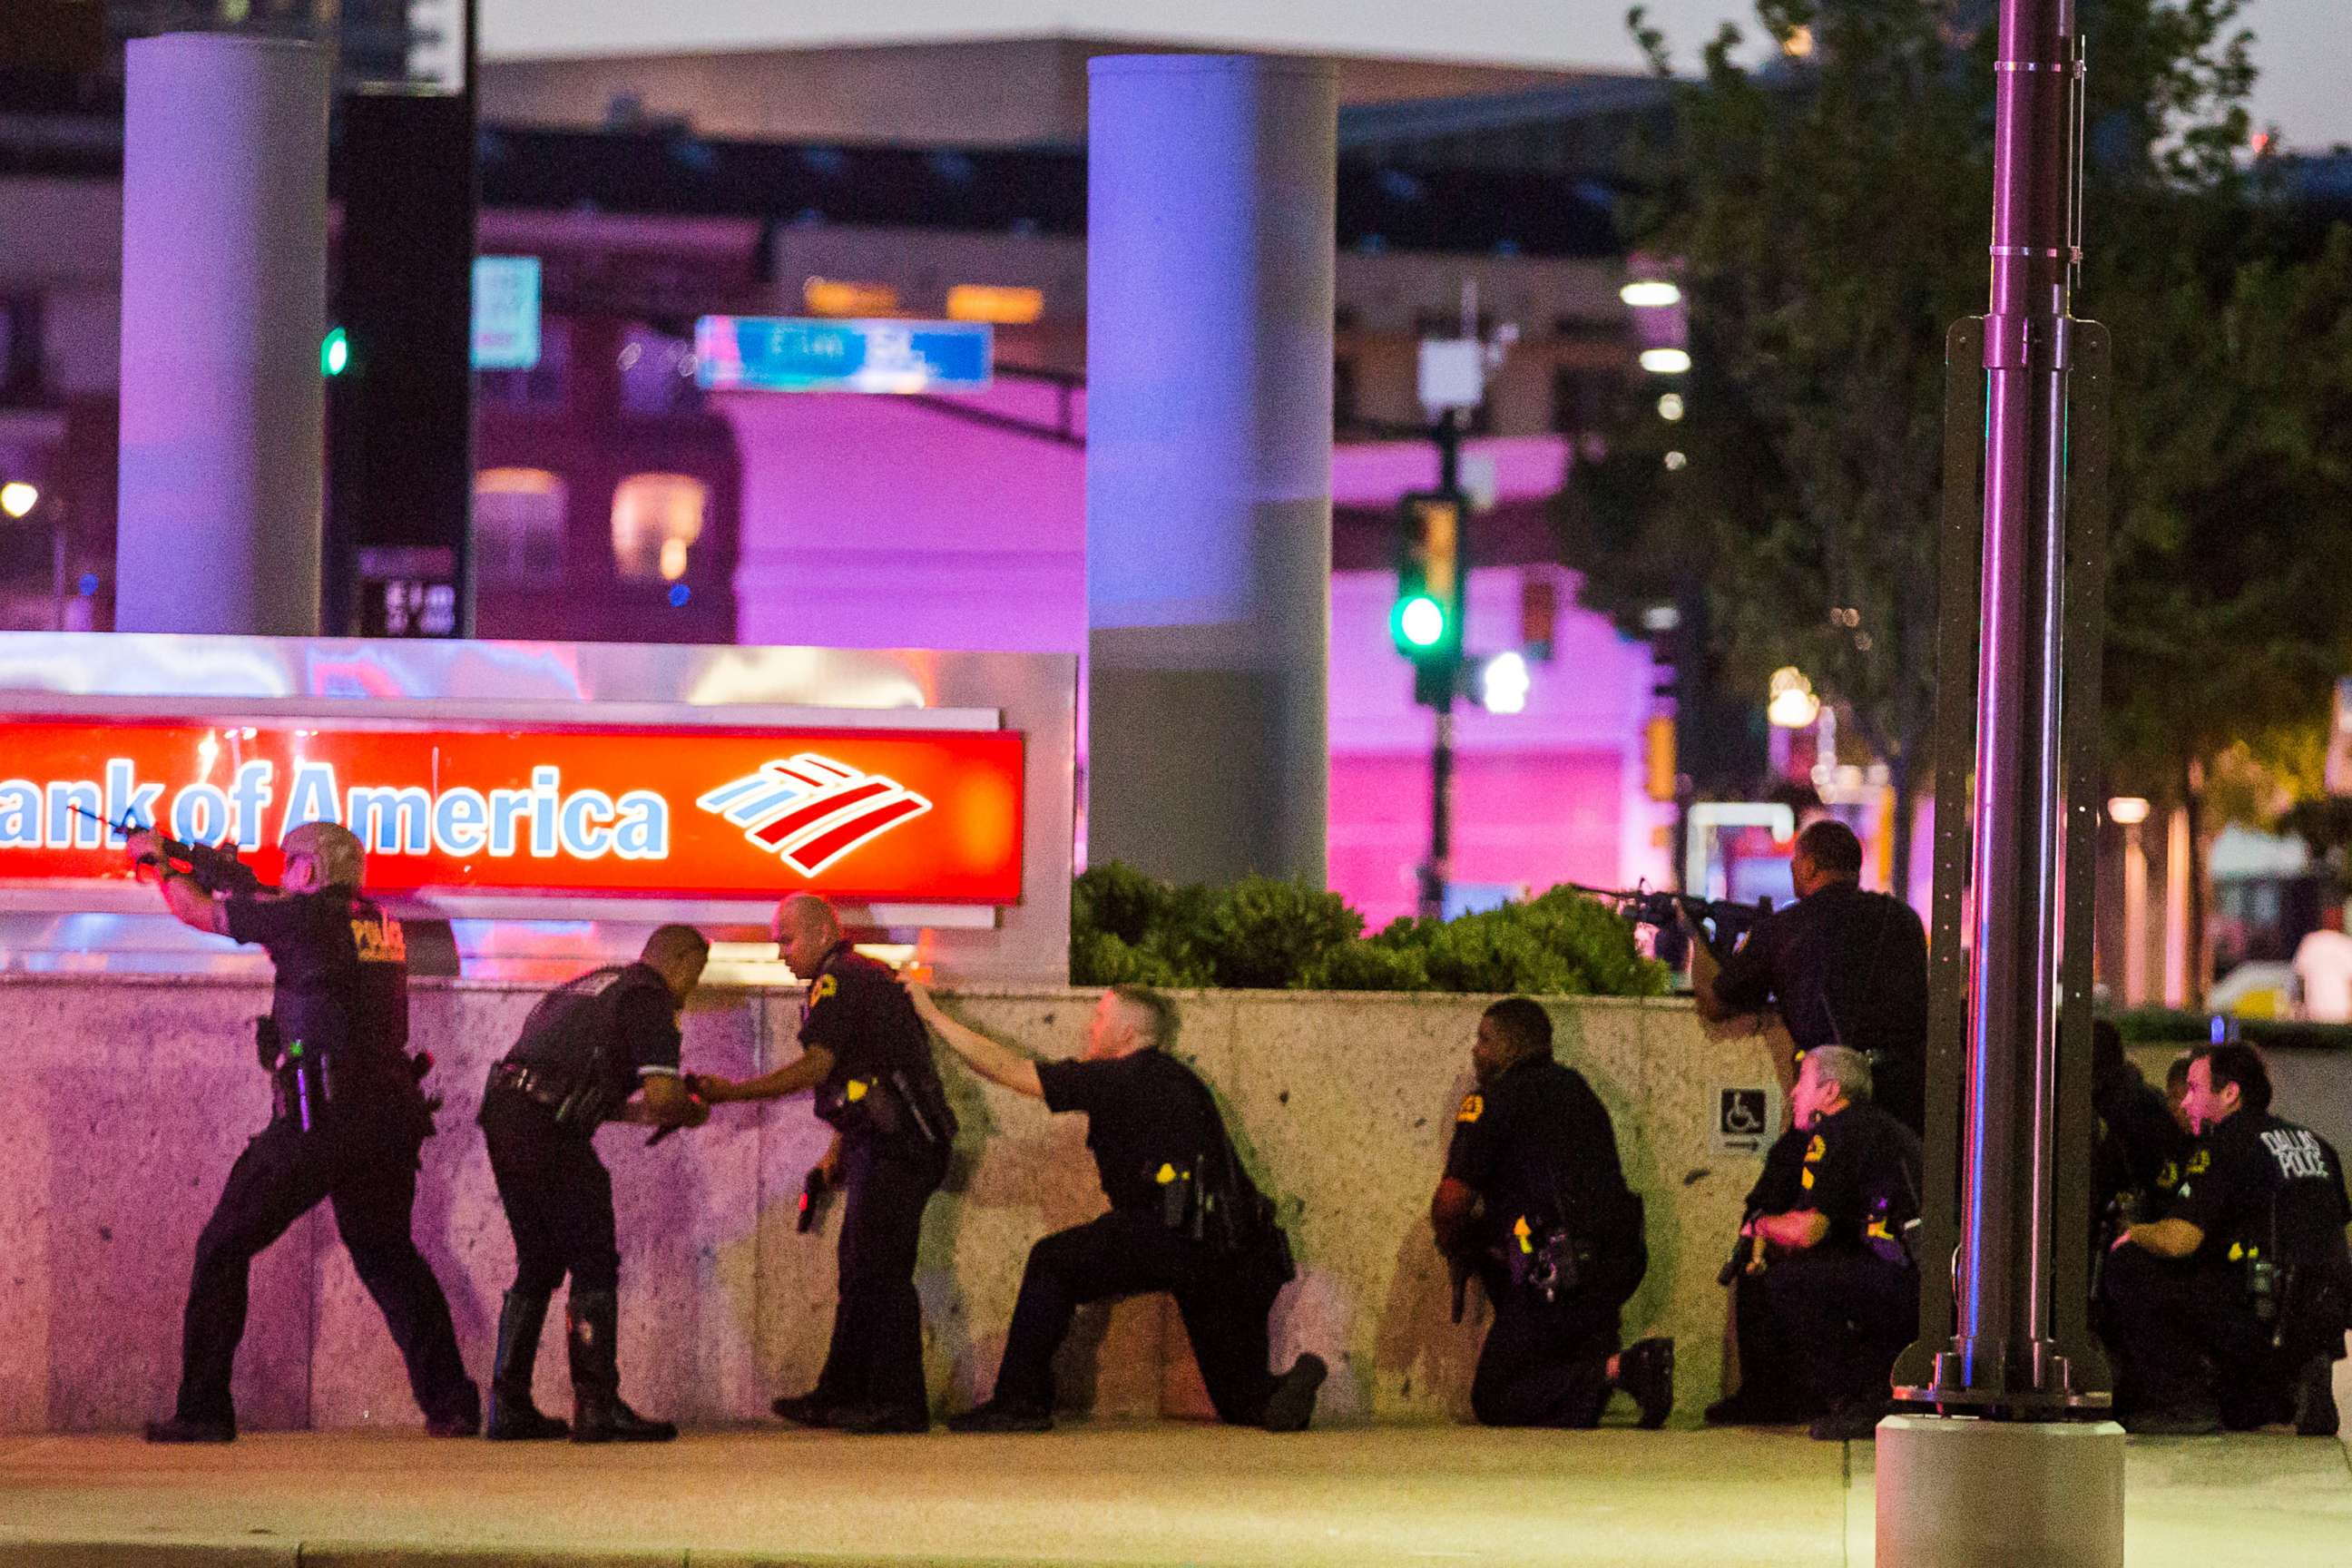 PHOTO: Dallas Police respond after shots were fired at a Black Lives Matter rally in downtown Dallas, July 7, 2016.